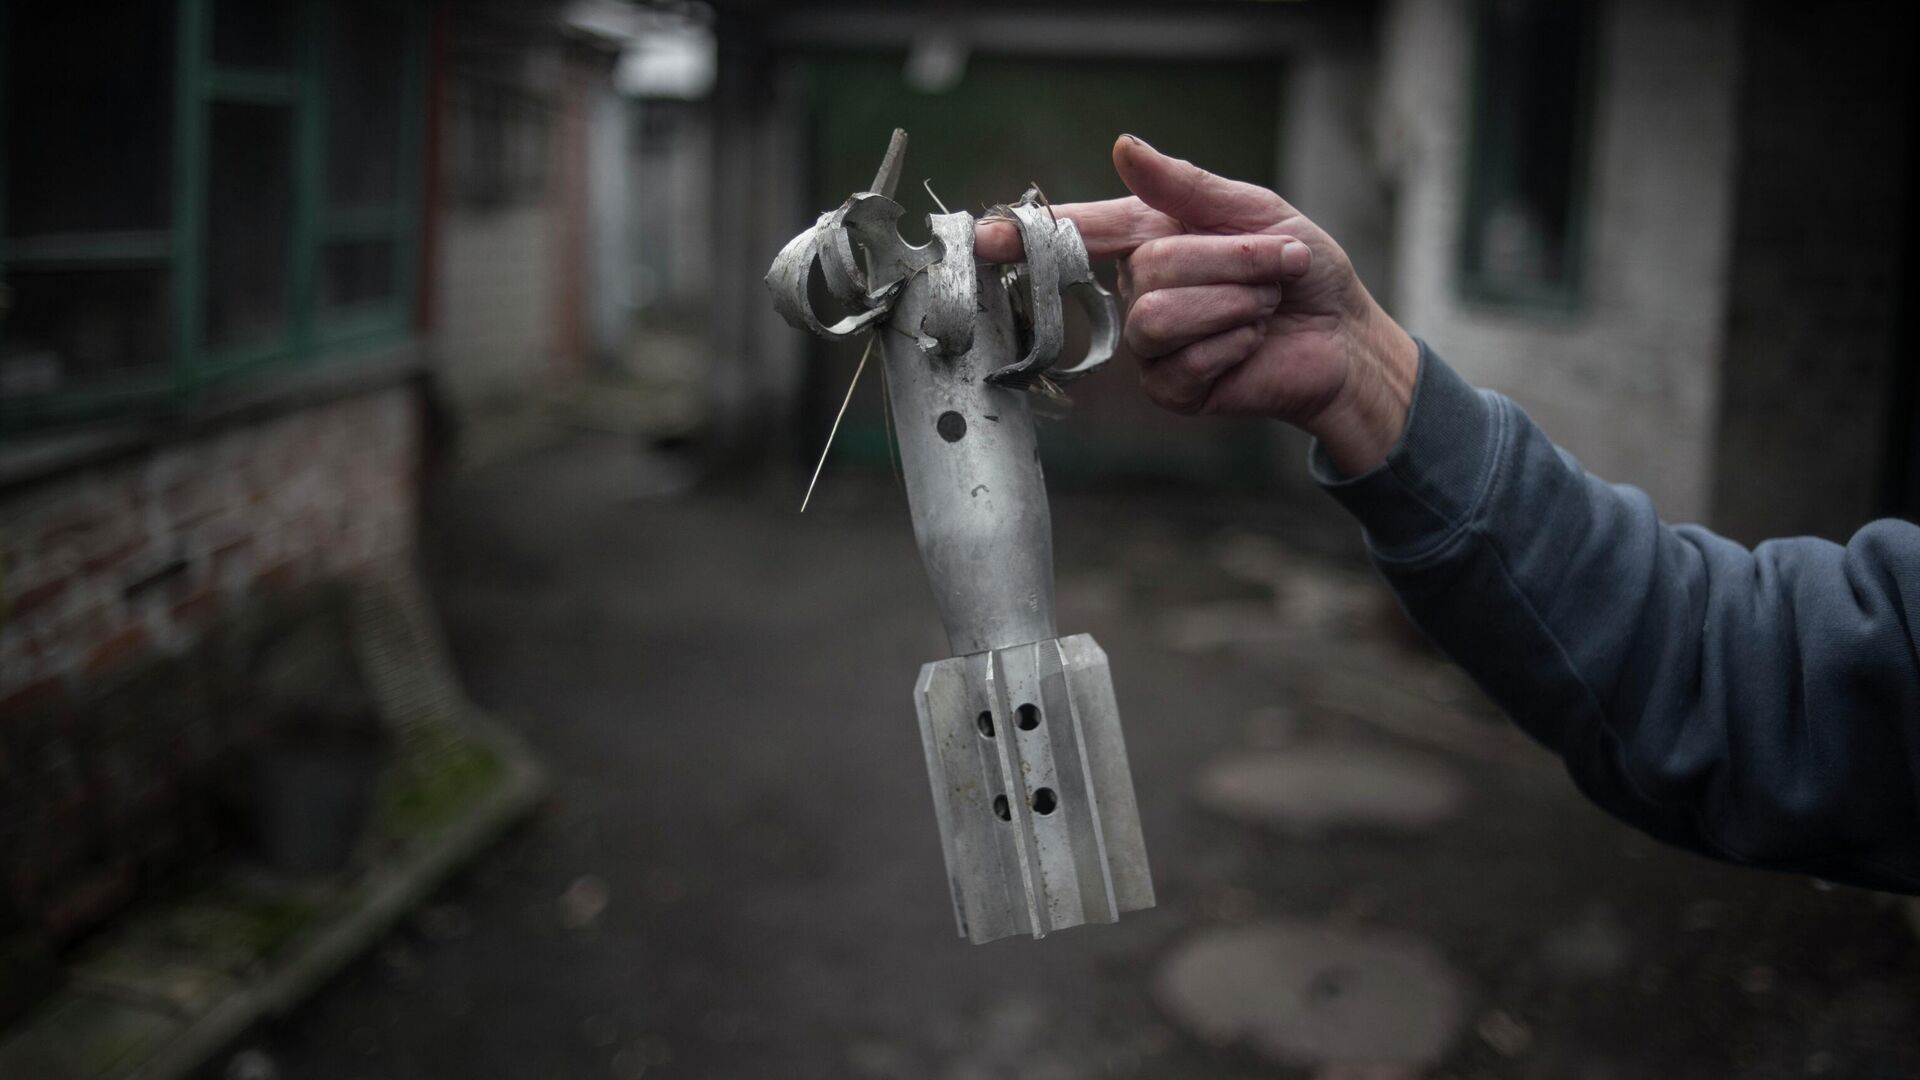 A woman shows a fragment of a mortar projectile in the village of Zaytsevo, Donetsk People’s Republic. Last month, the DPR’s Ministry of Emergency Situations declared that demining Donbass would take decades. - Sputnik International, 1920, 07.07.2022